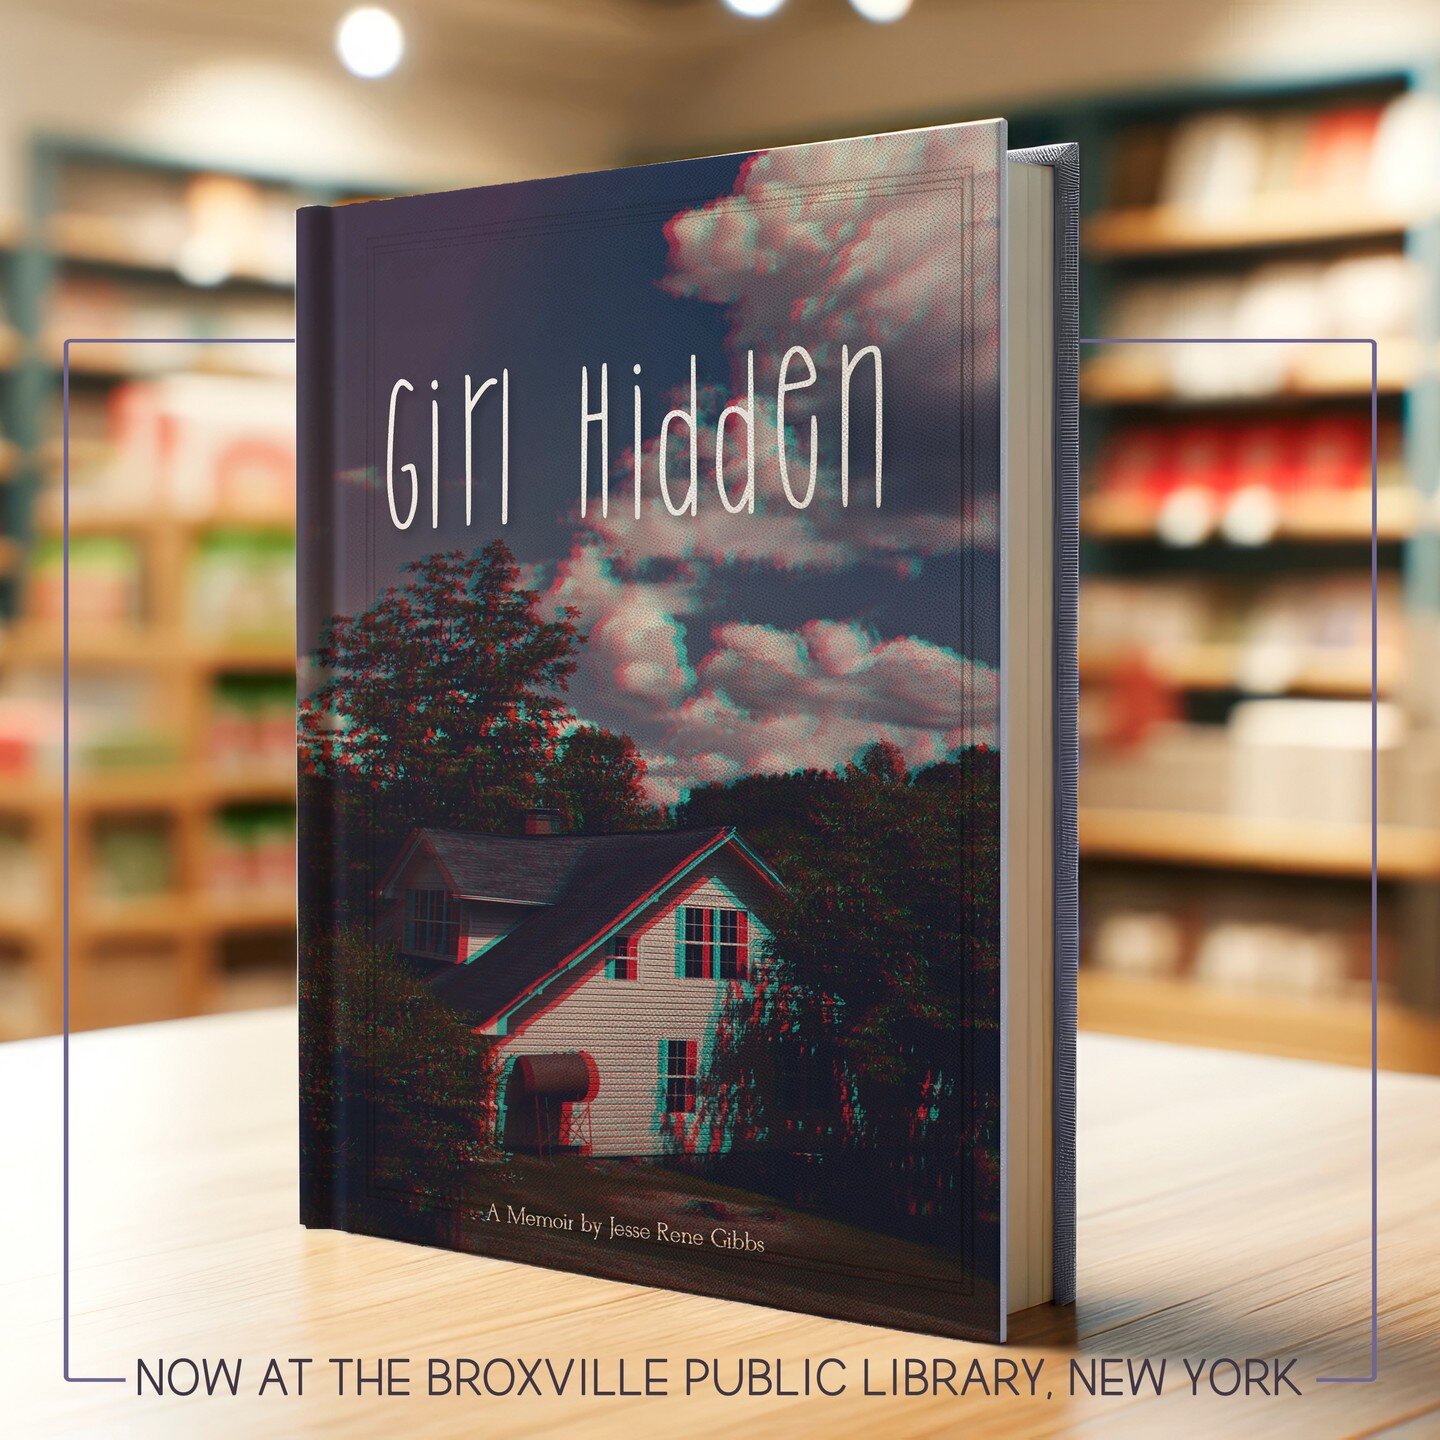 Holy moses, you guys! Guess who's in the freaking LIBRARY now?? *happy dances around the office
Check me out (literally) at the Bronxville Public Library in New York: https://catalog.bronxvillelibrary.org/Author/Home?author=Jesse%20Rene%20Gibbs
#girl